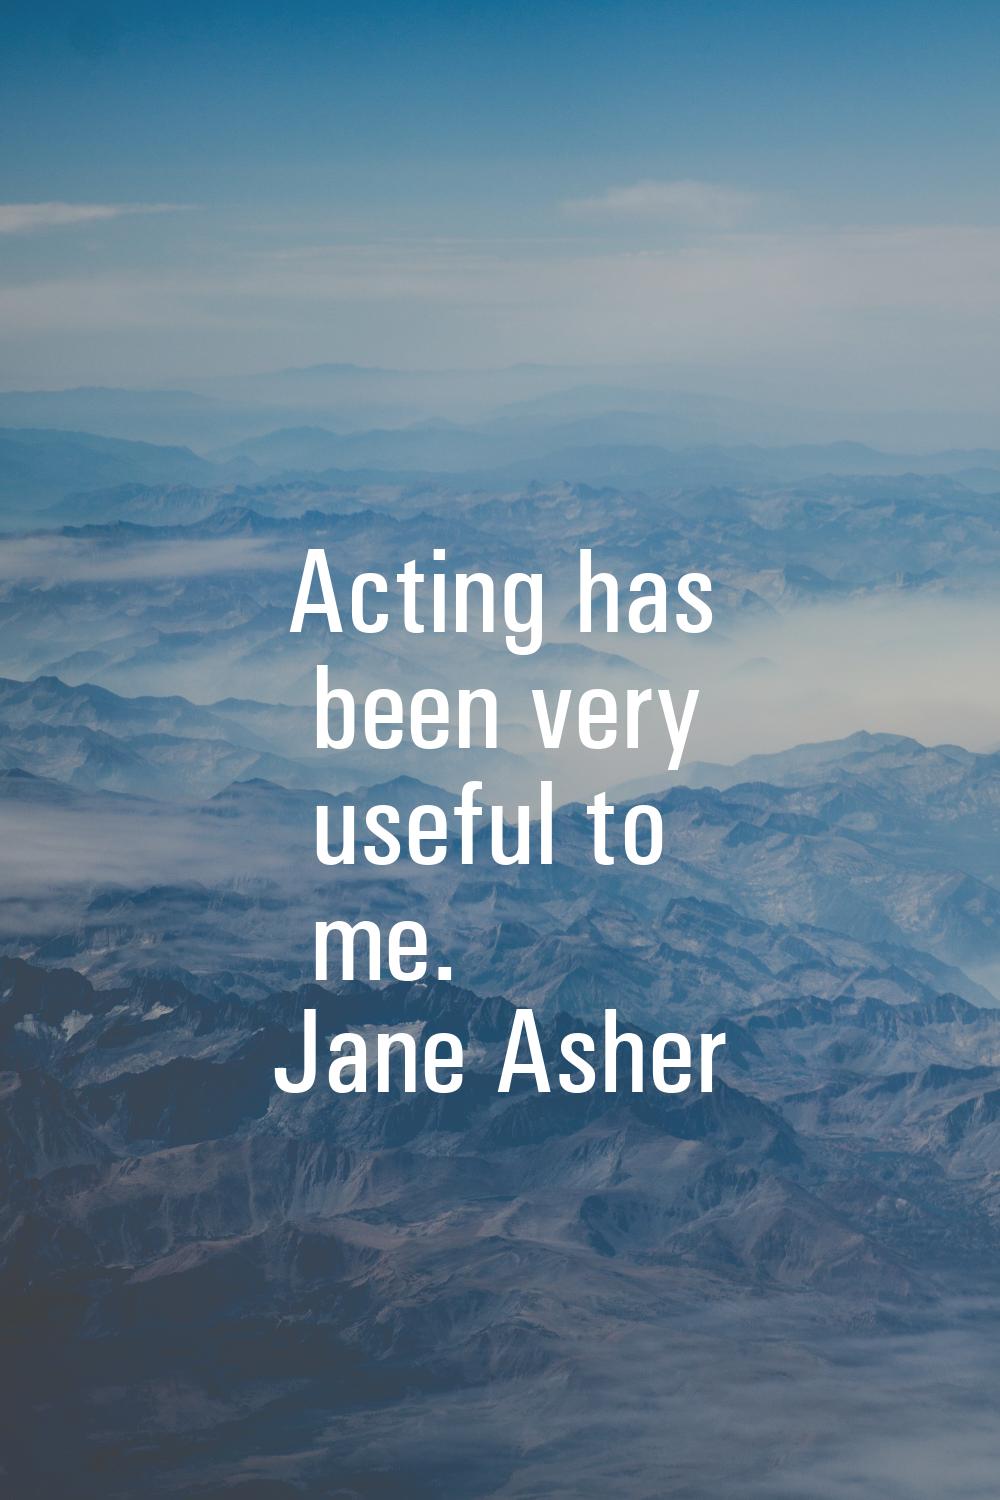 Acting has been very useful to me.